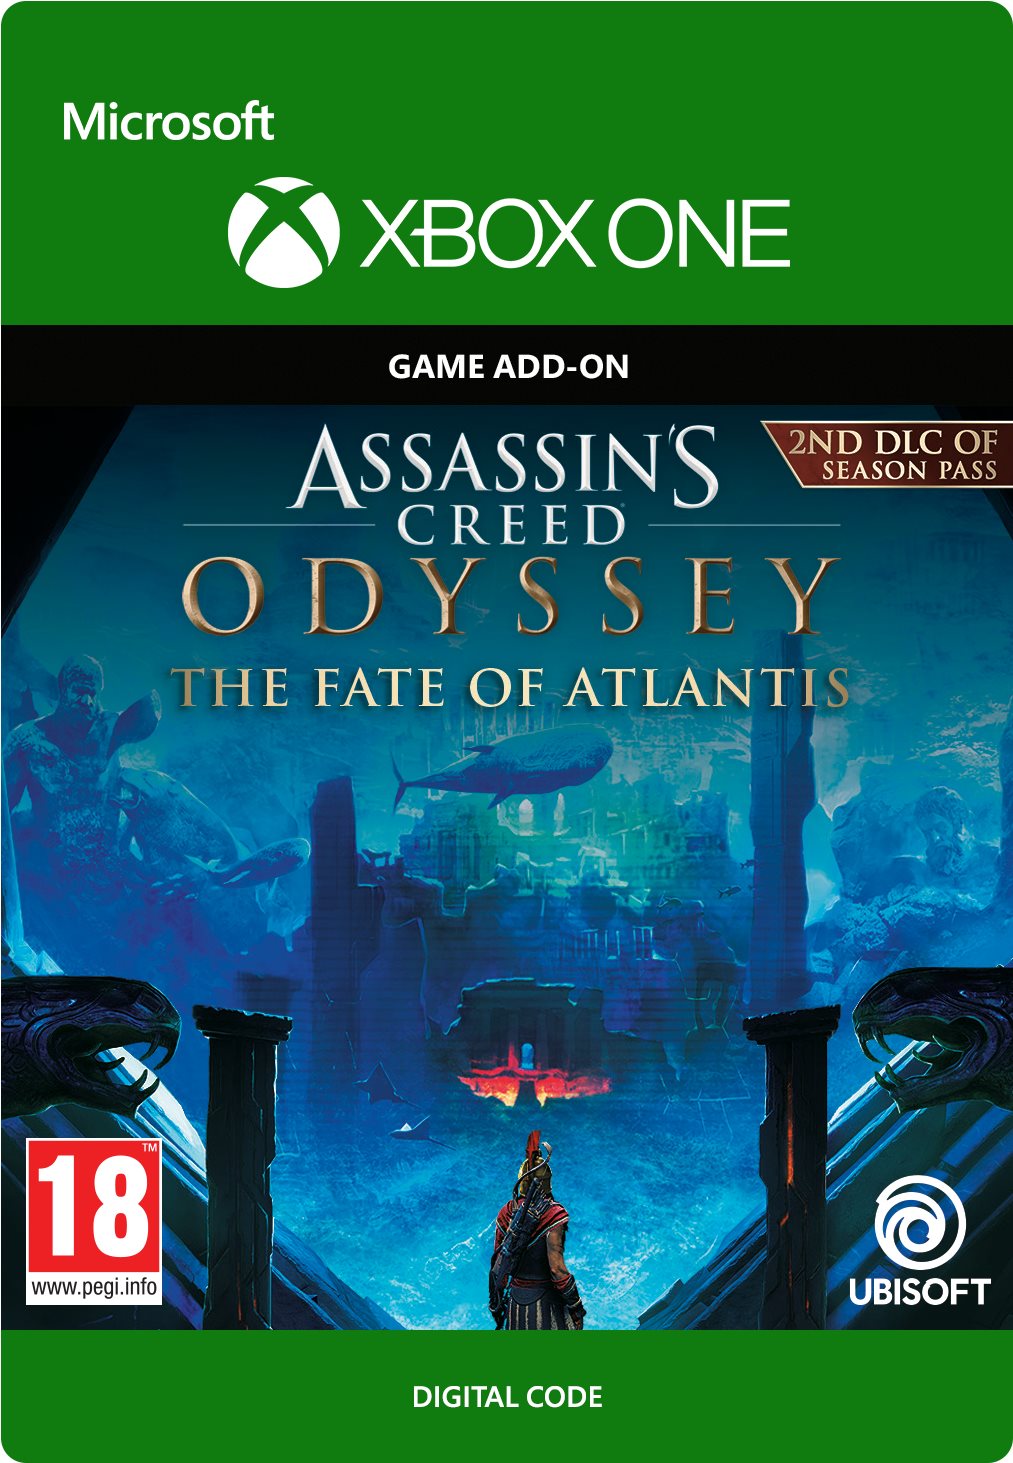 Assassin's Creed Odyssey: The Fate of Atlantis - Xbox Digital